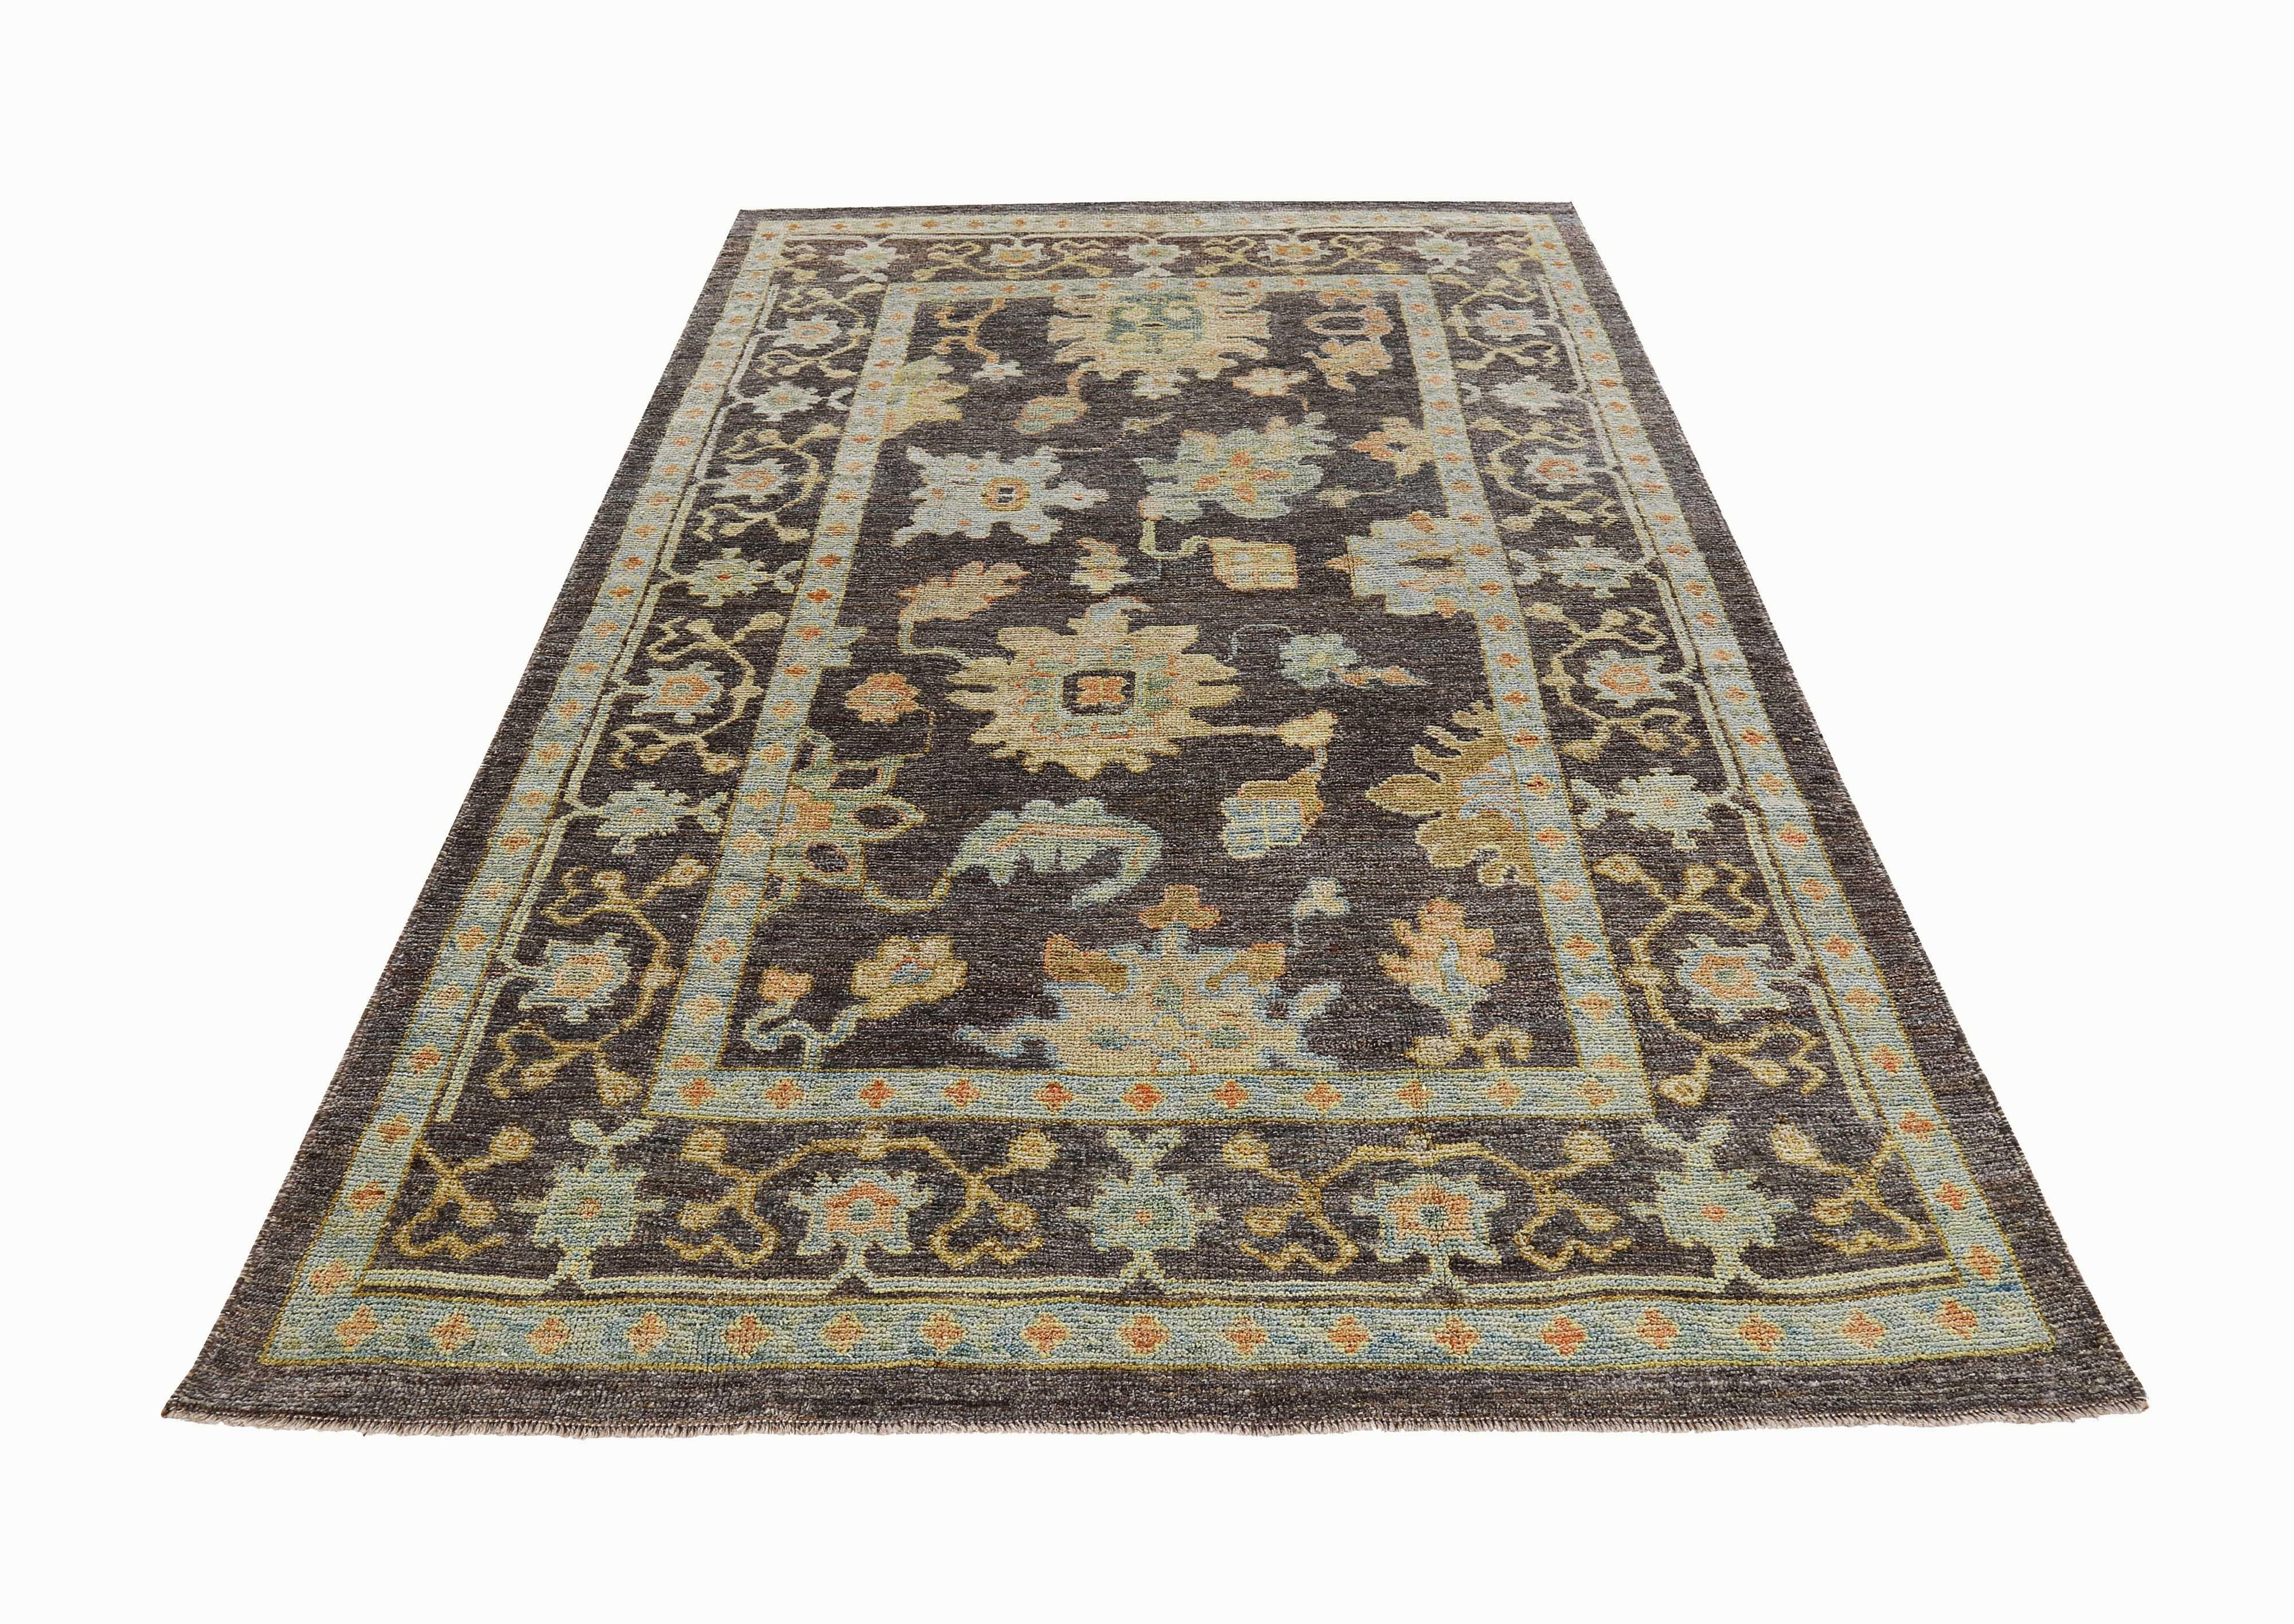 New Turkish rug made of handwoven sheep’s wool of the finest quality. It’s colored with organic vegetable dyes that are certified safe for humans and pets alike. It features blue and beige floral details on a lovely brown field. Flower patterns are